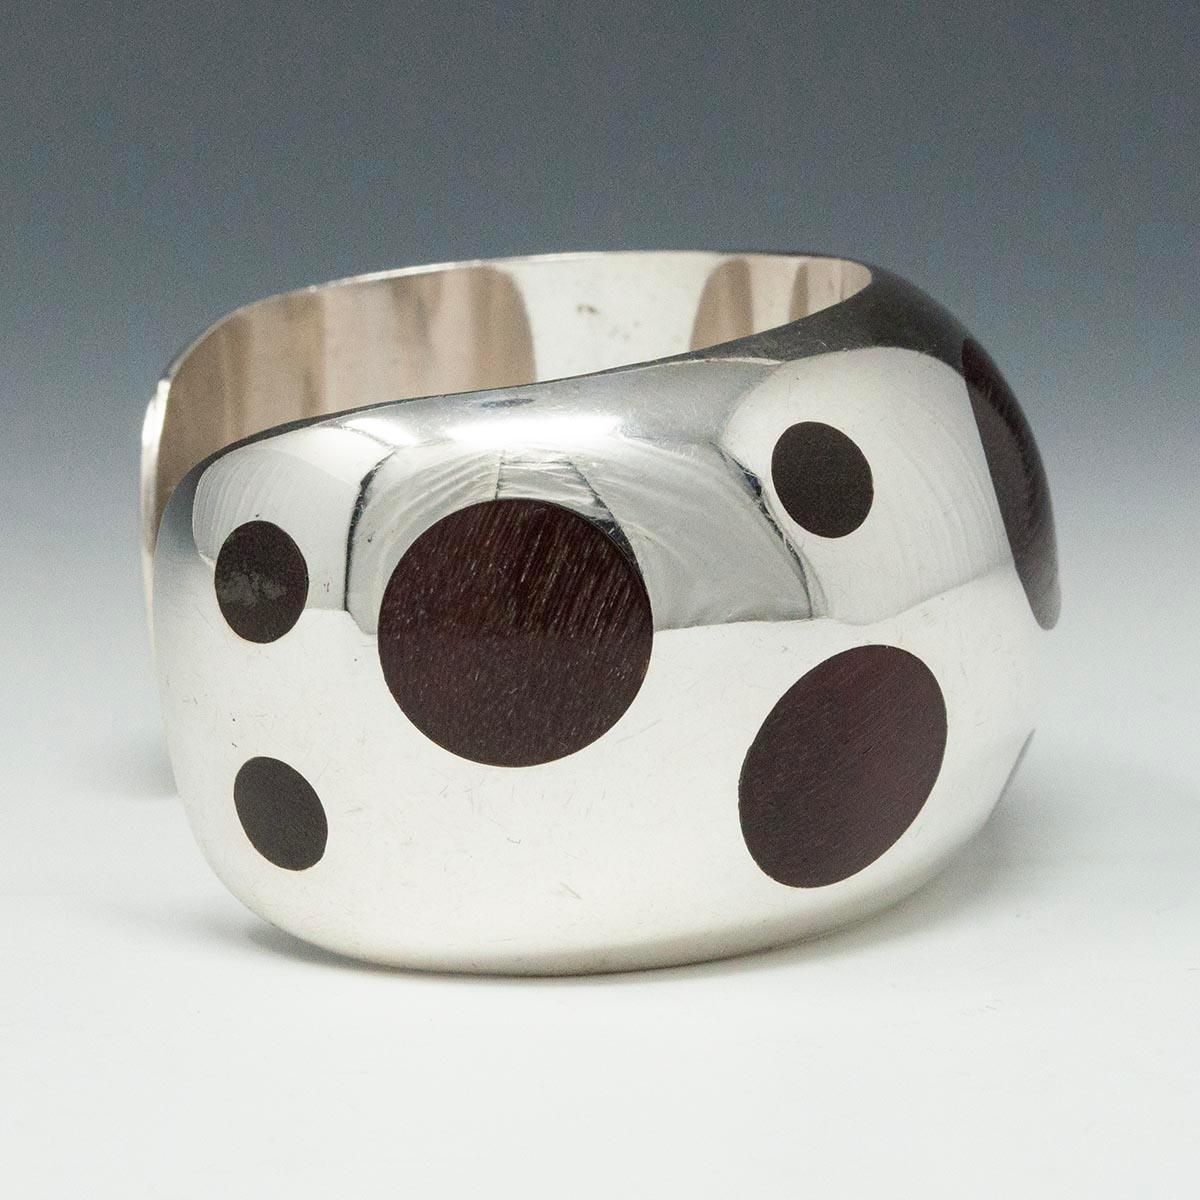 Modern silver and rosewood cuff
A beautiful silver cuff with inlaid rosewood circles, inspired by the 1960s William Spratling design. Marked Mexico 925, it measures 2.5 inches in diameter with a 1-1/8 inch gap. It's 1.5 inches wide, 82 grams.
